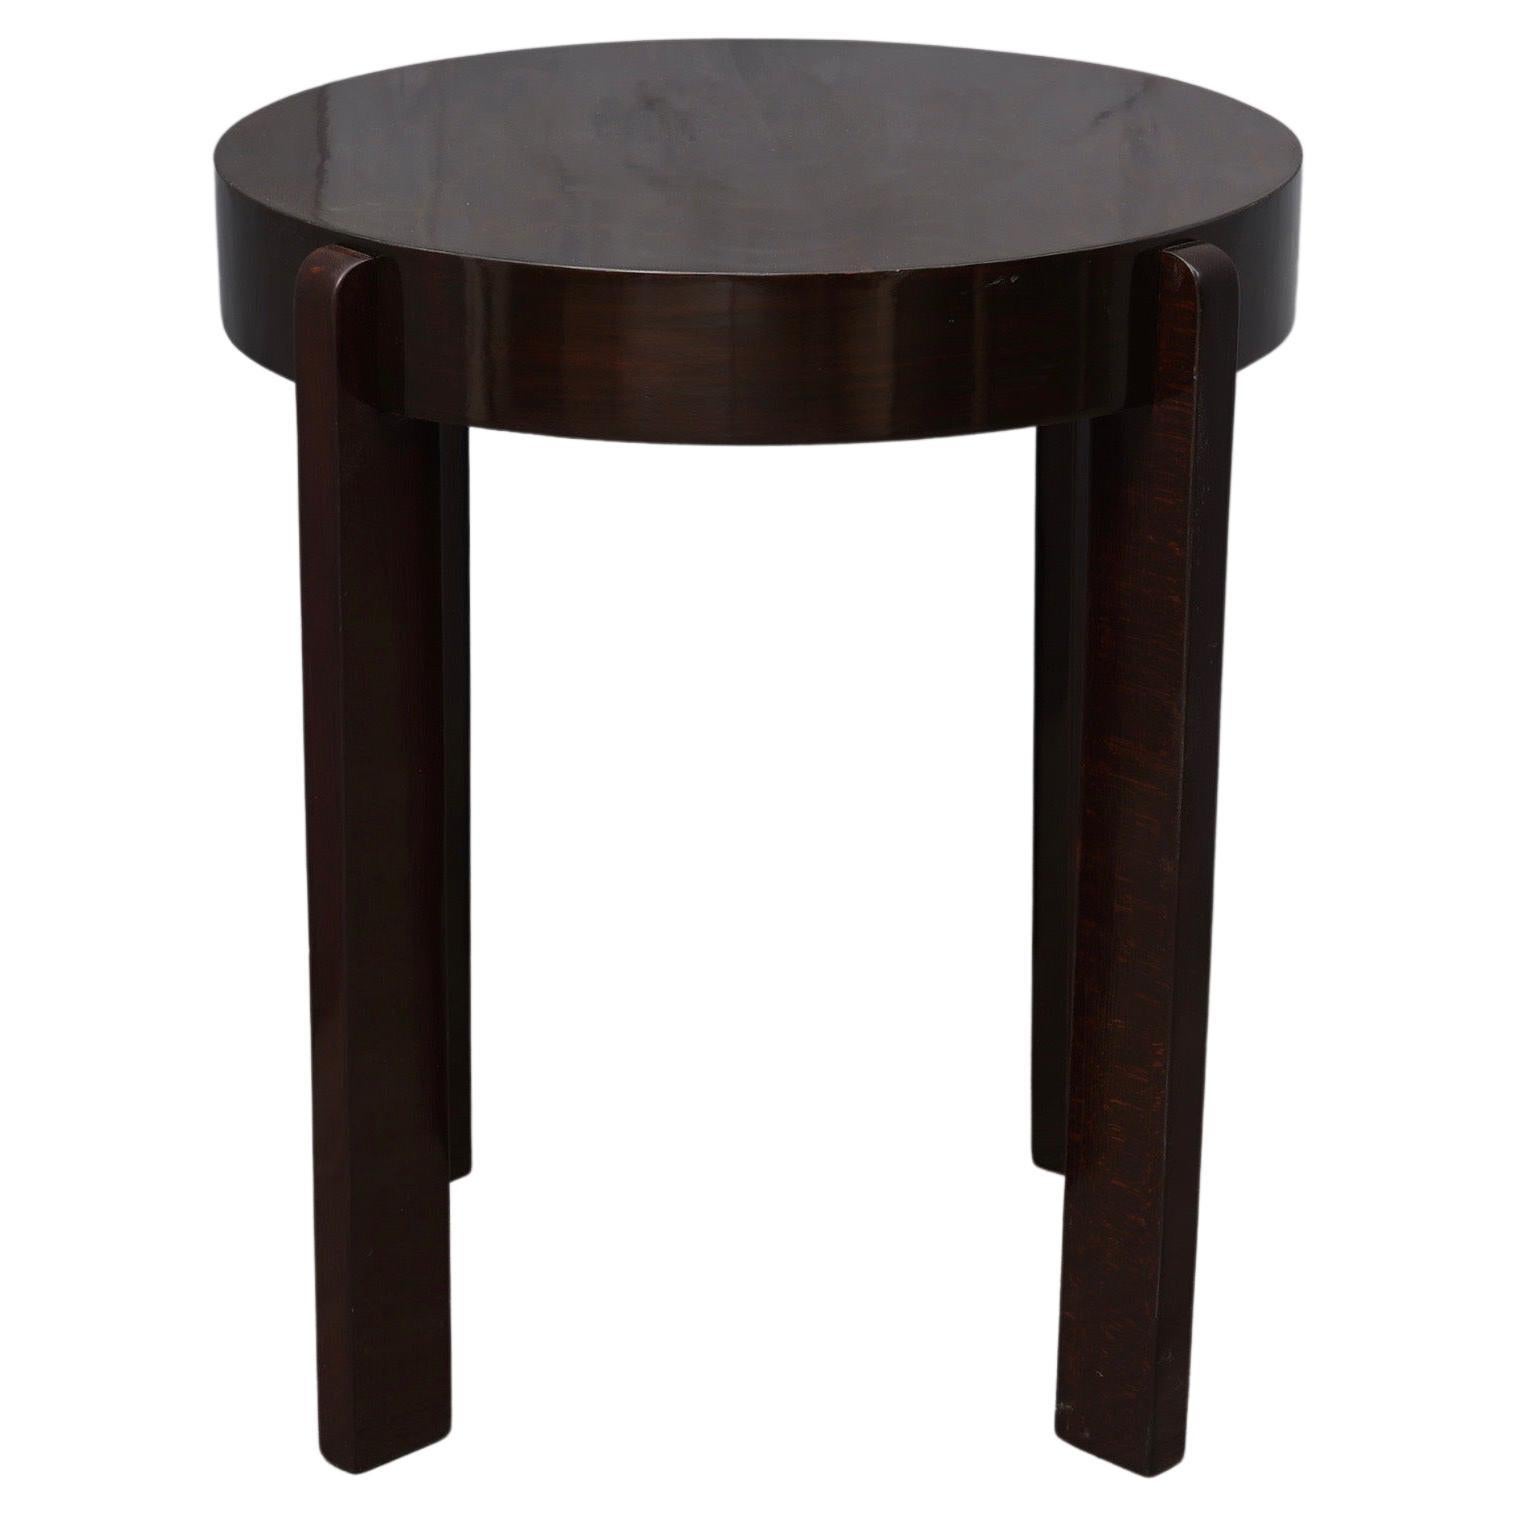 Midcentury Round Walnut Wood Stained in Dark Mahogany Side Table, 1940 For Sale